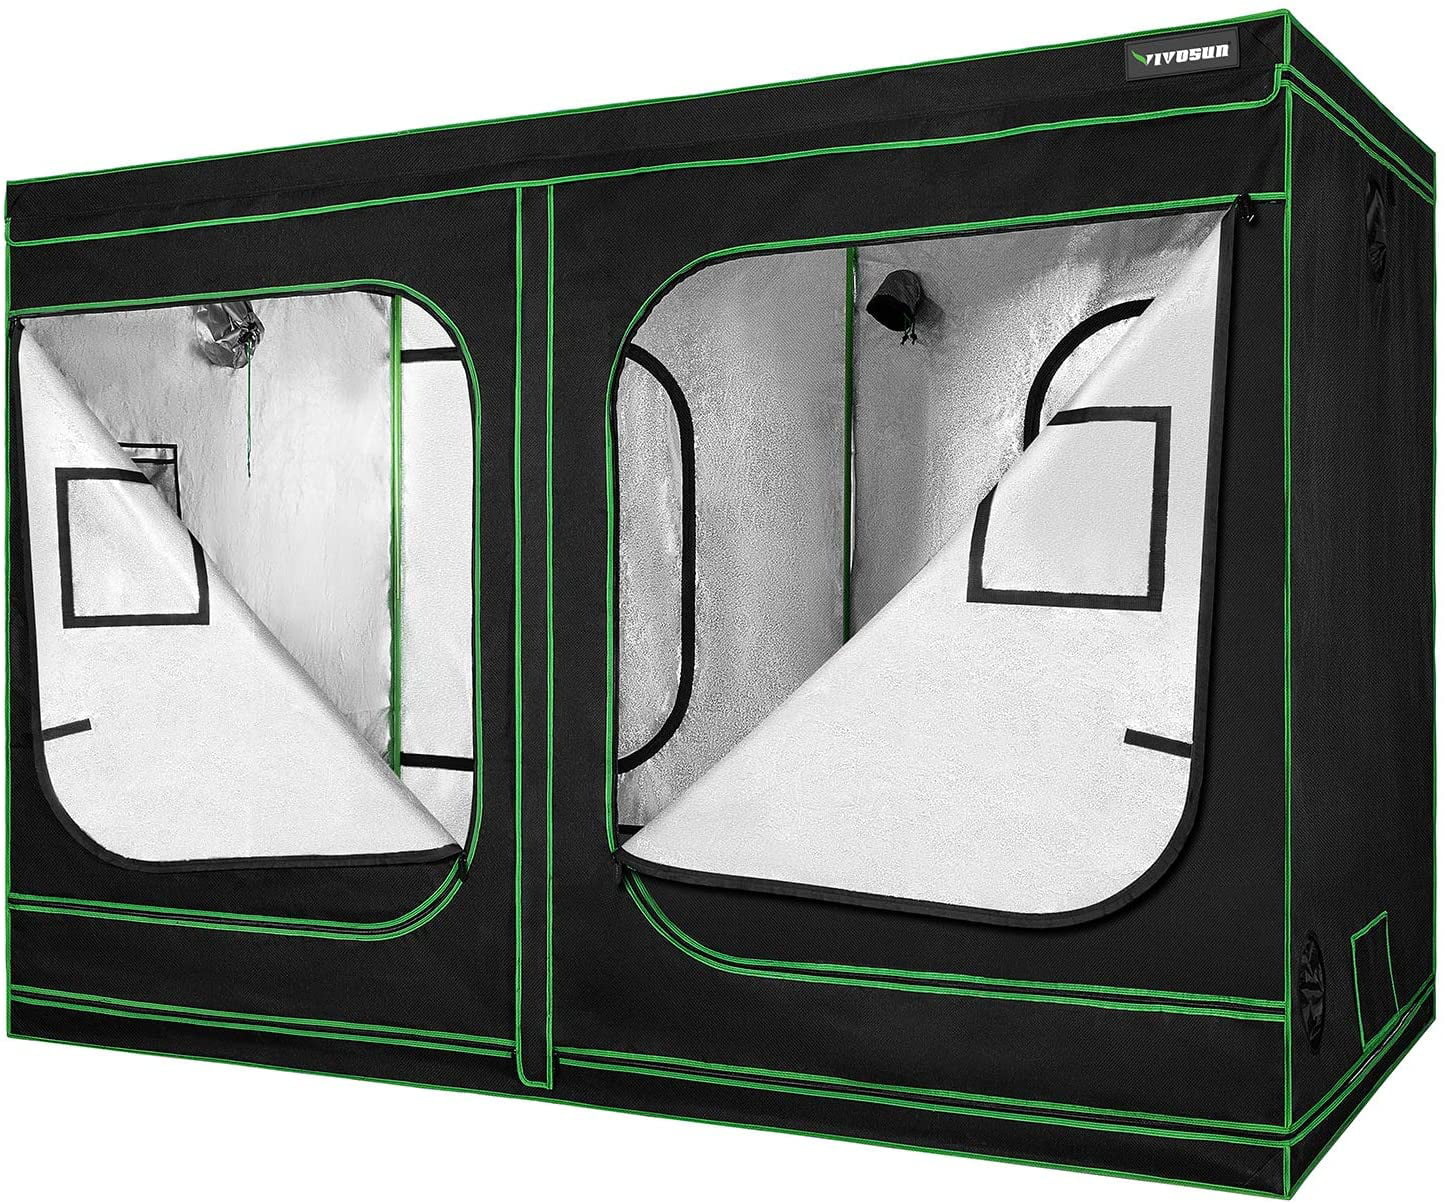 Details about   96''x48''x80'' Indoor Grow Tent Hydroponic Reflective Mylar Room Box 9'x4' ft 